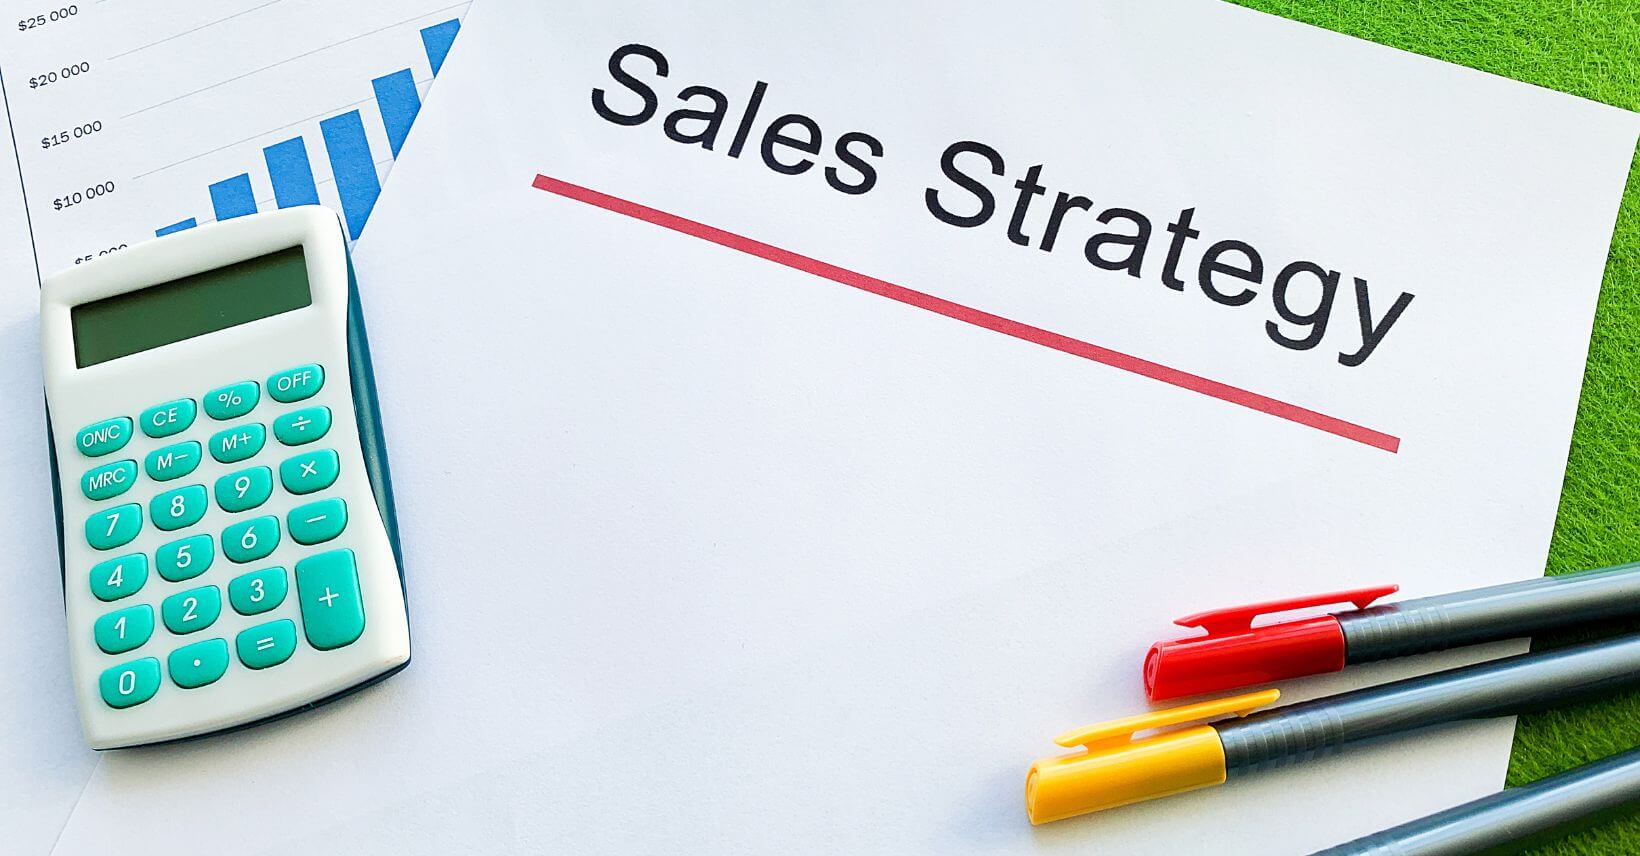 Final Expense Sales Strategy